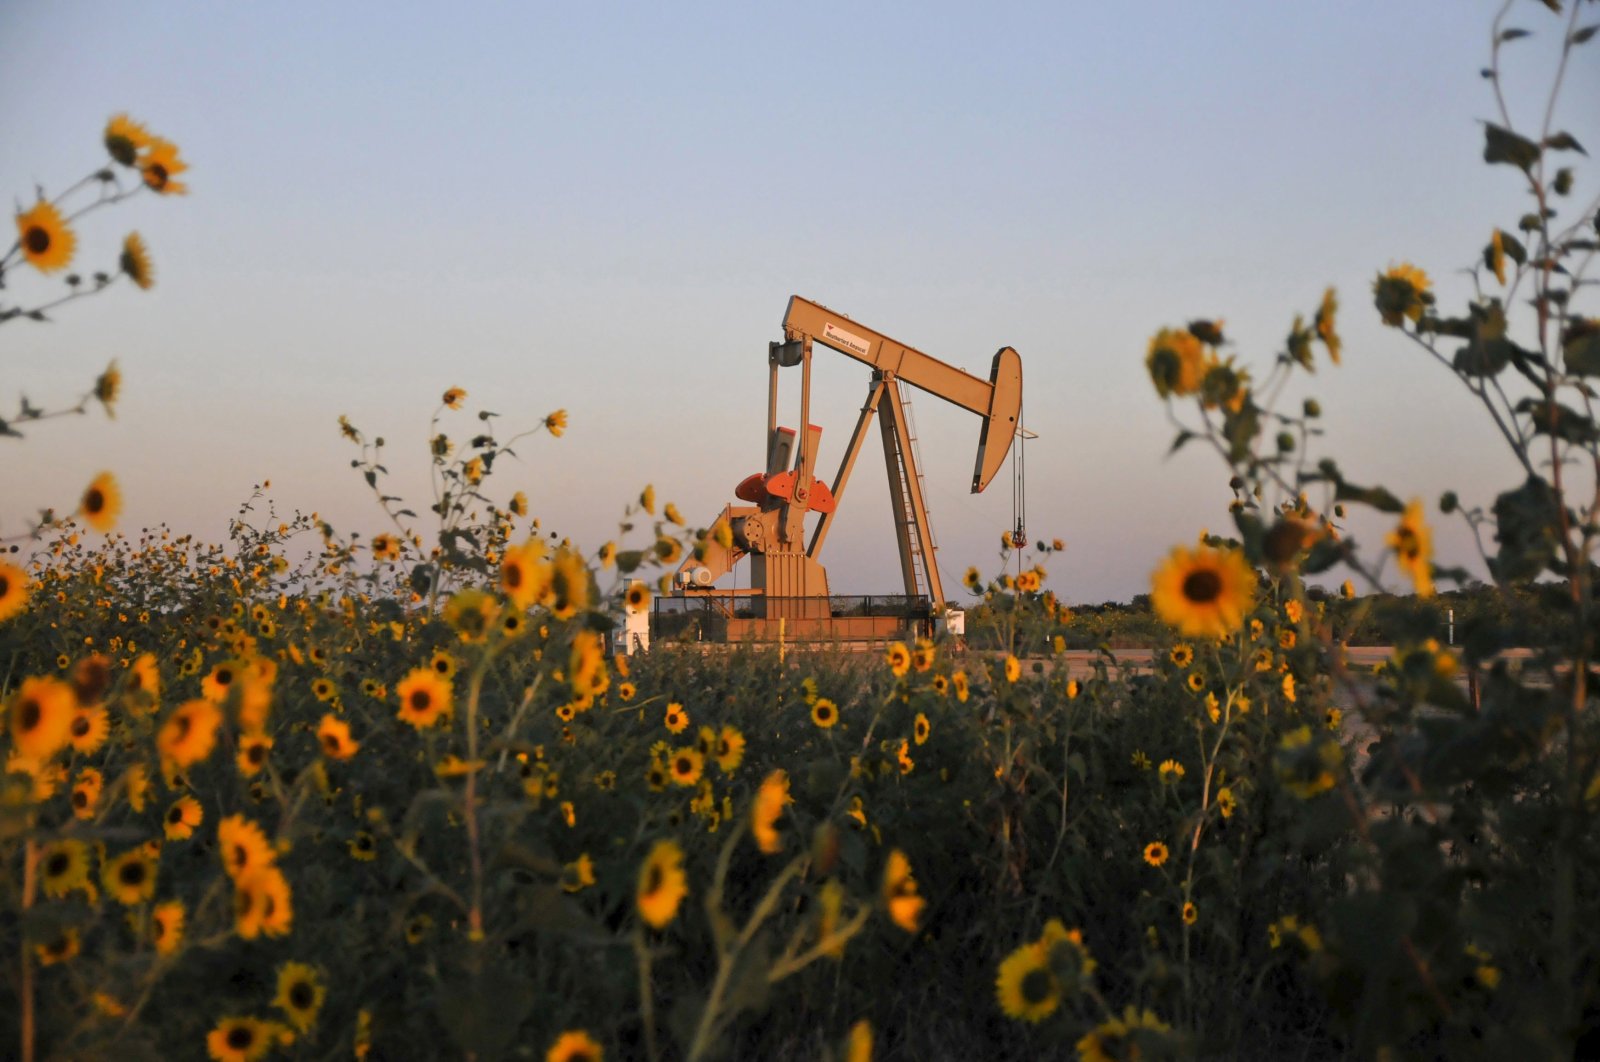 A pump jack operates at a well site leased by Devon Energy Production Company near Guthrie, Oklahoma, the U.S., Sept. 15, 2015. (Reuters Photo)